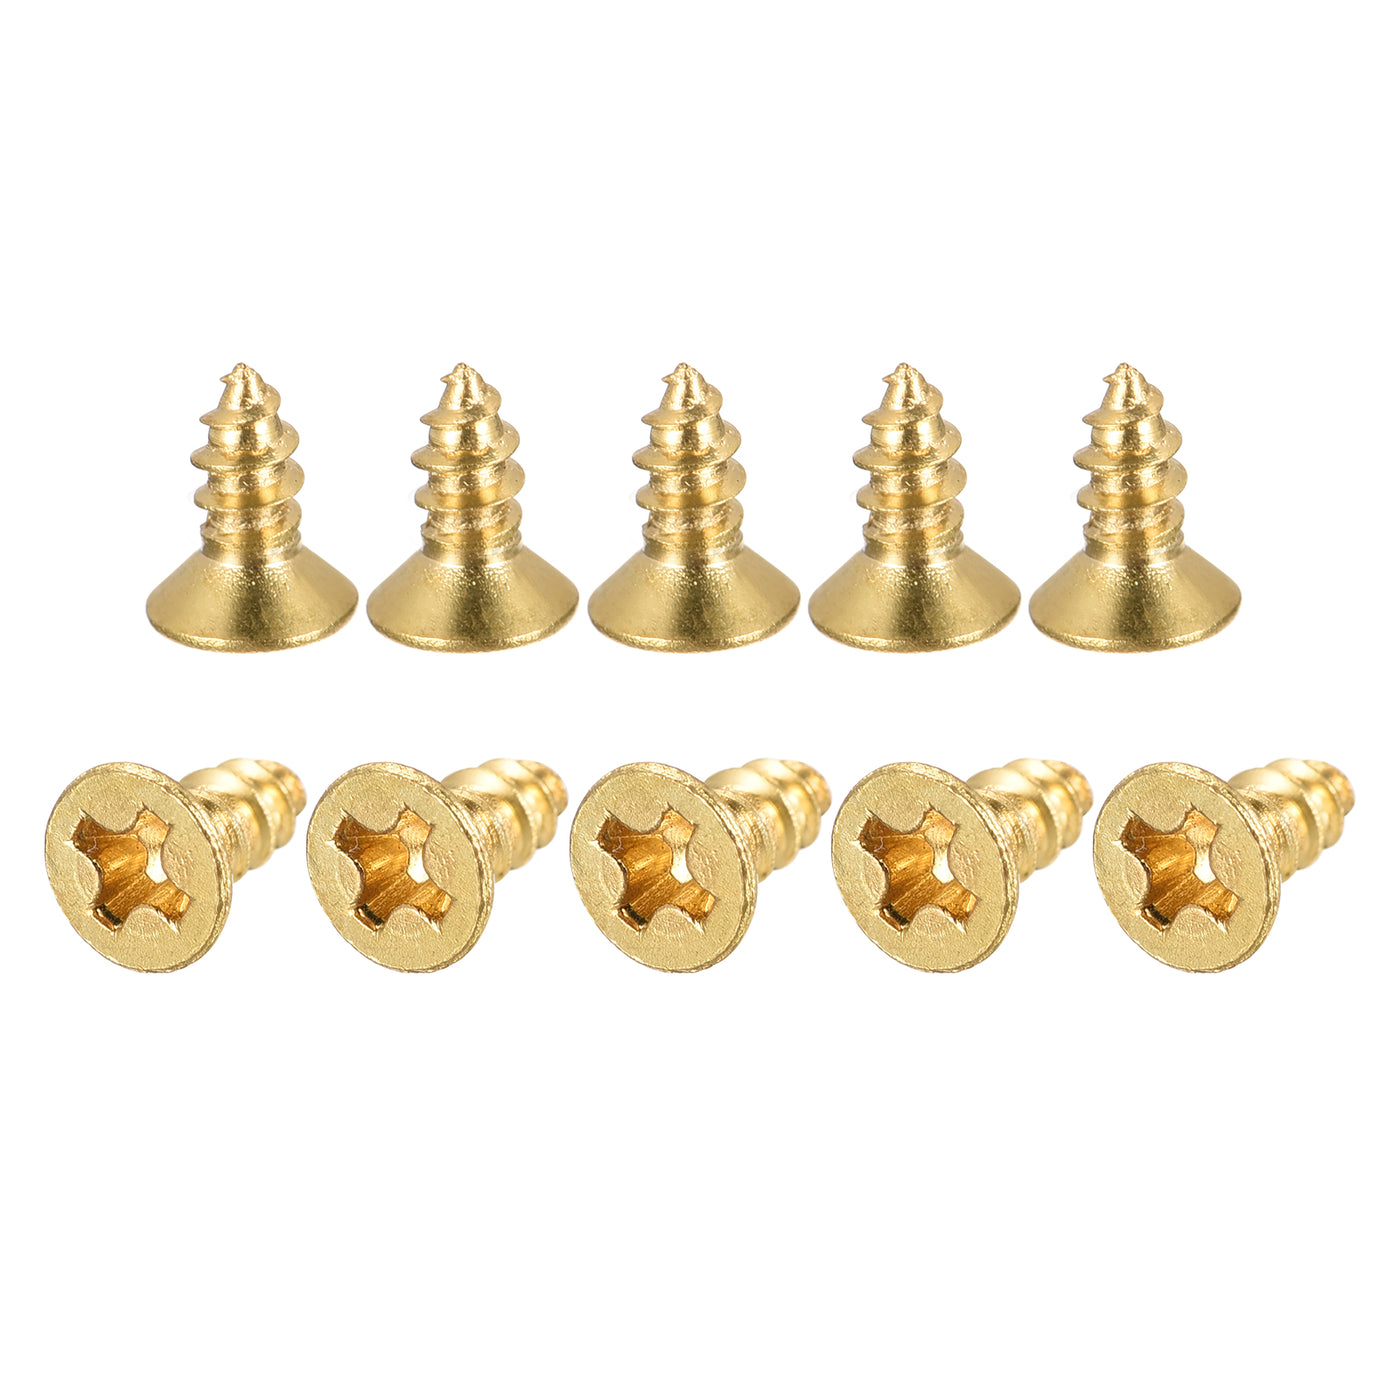 Uxcell Uxcell Brass Wood Screws, M3.5x12mm Phillips Flat Head Self Tapping Connector for Door, Cabinet, Wooden Furniture 50Pcs